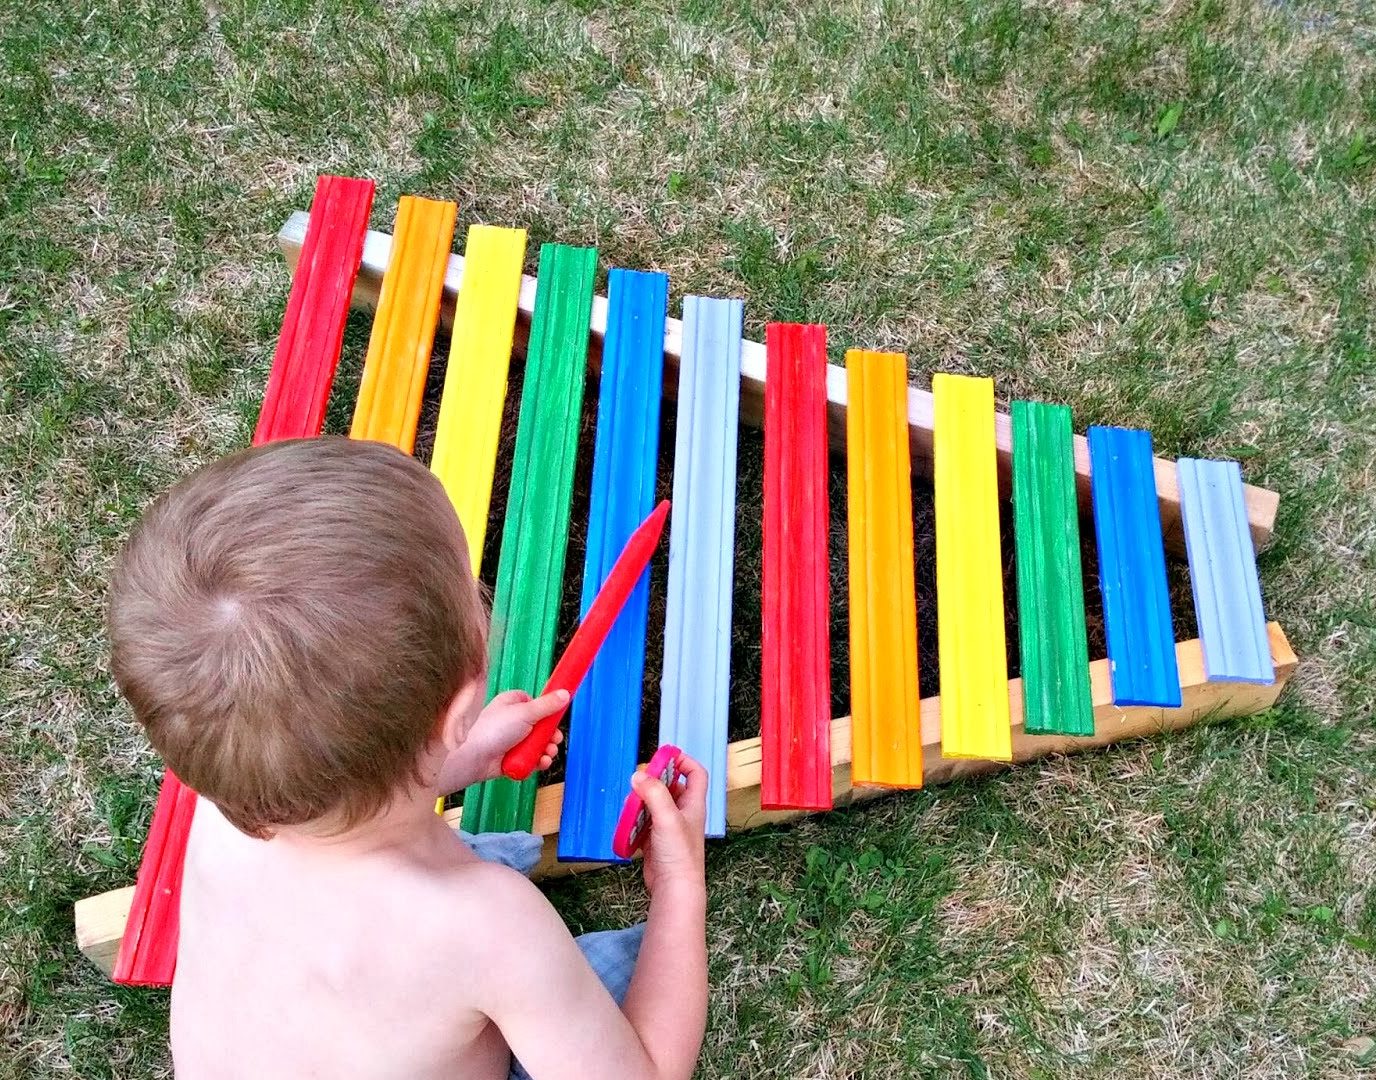 19 Homemade Musical Instruments for Kids